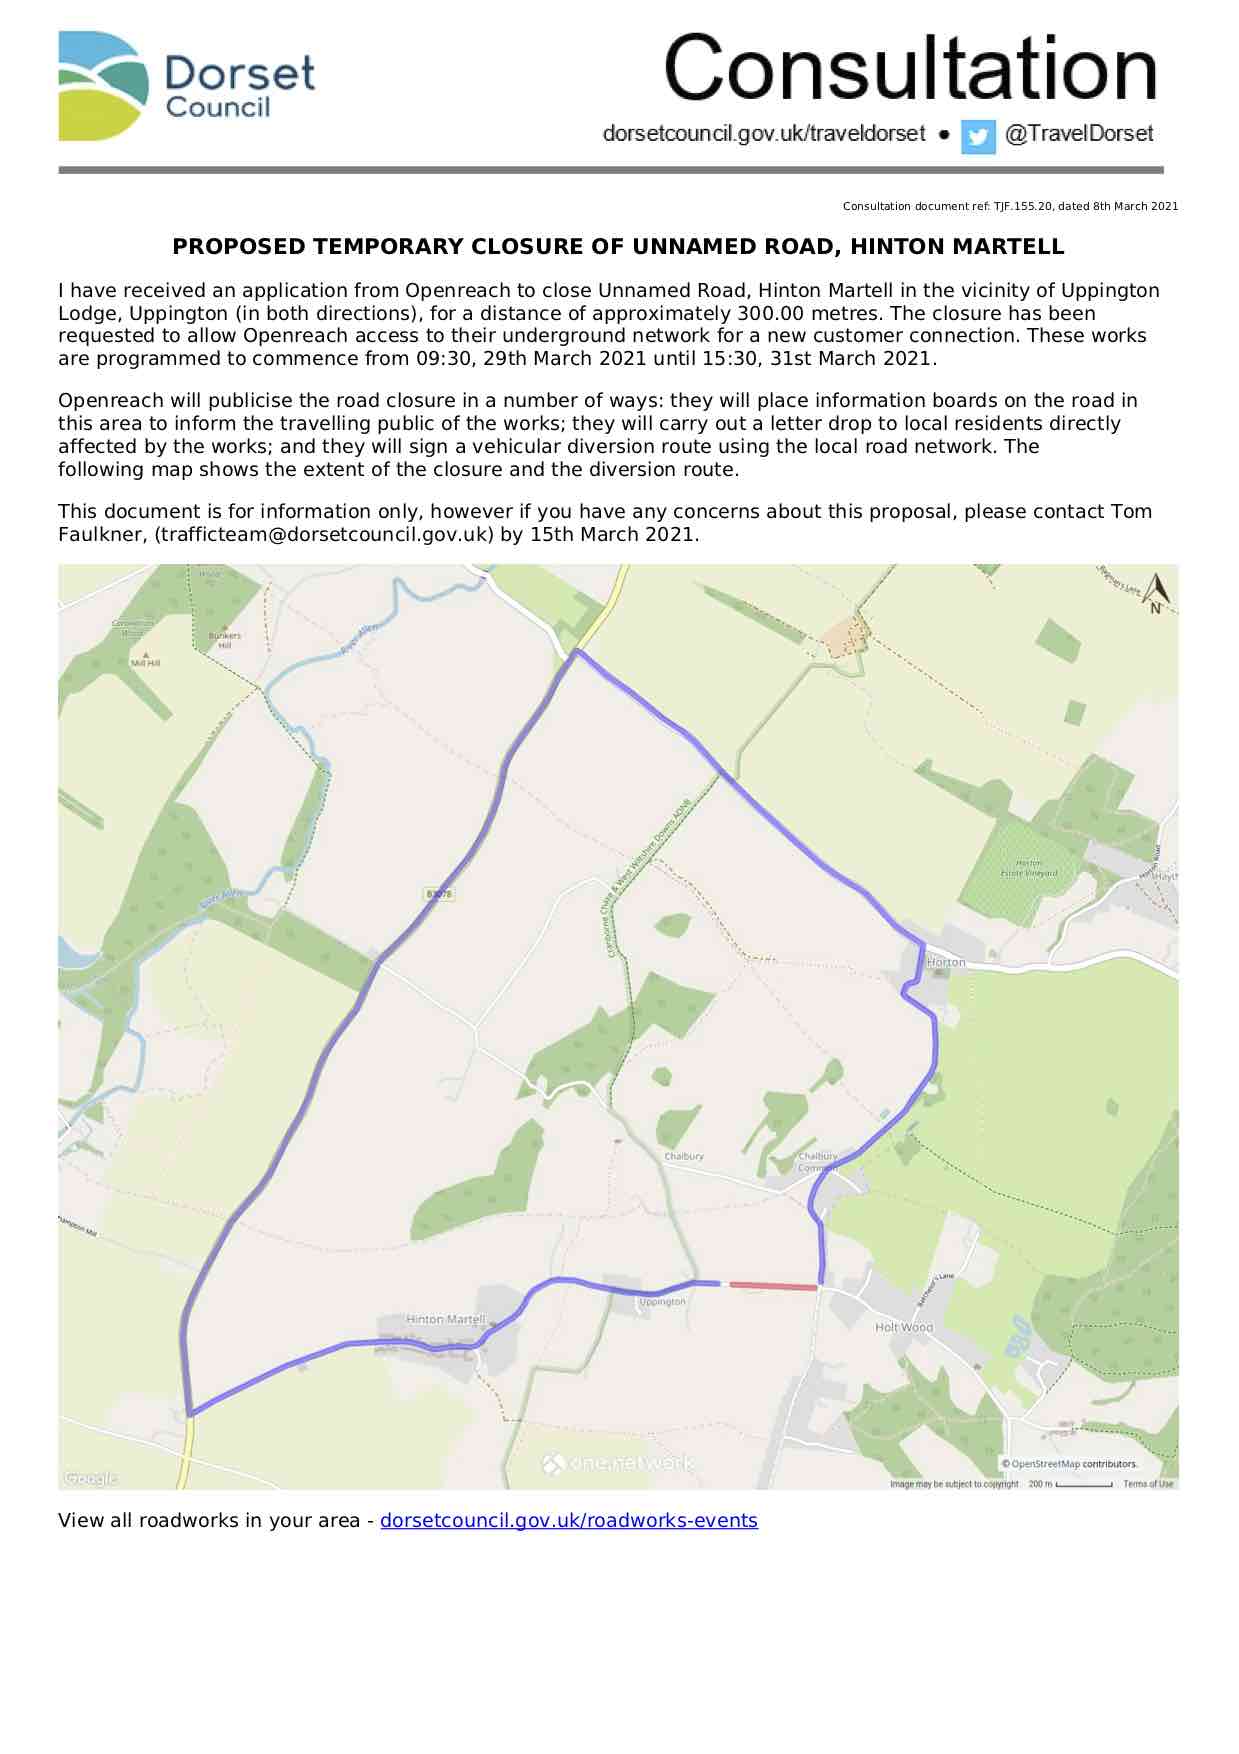 Image of consultation notice including the map with diversions